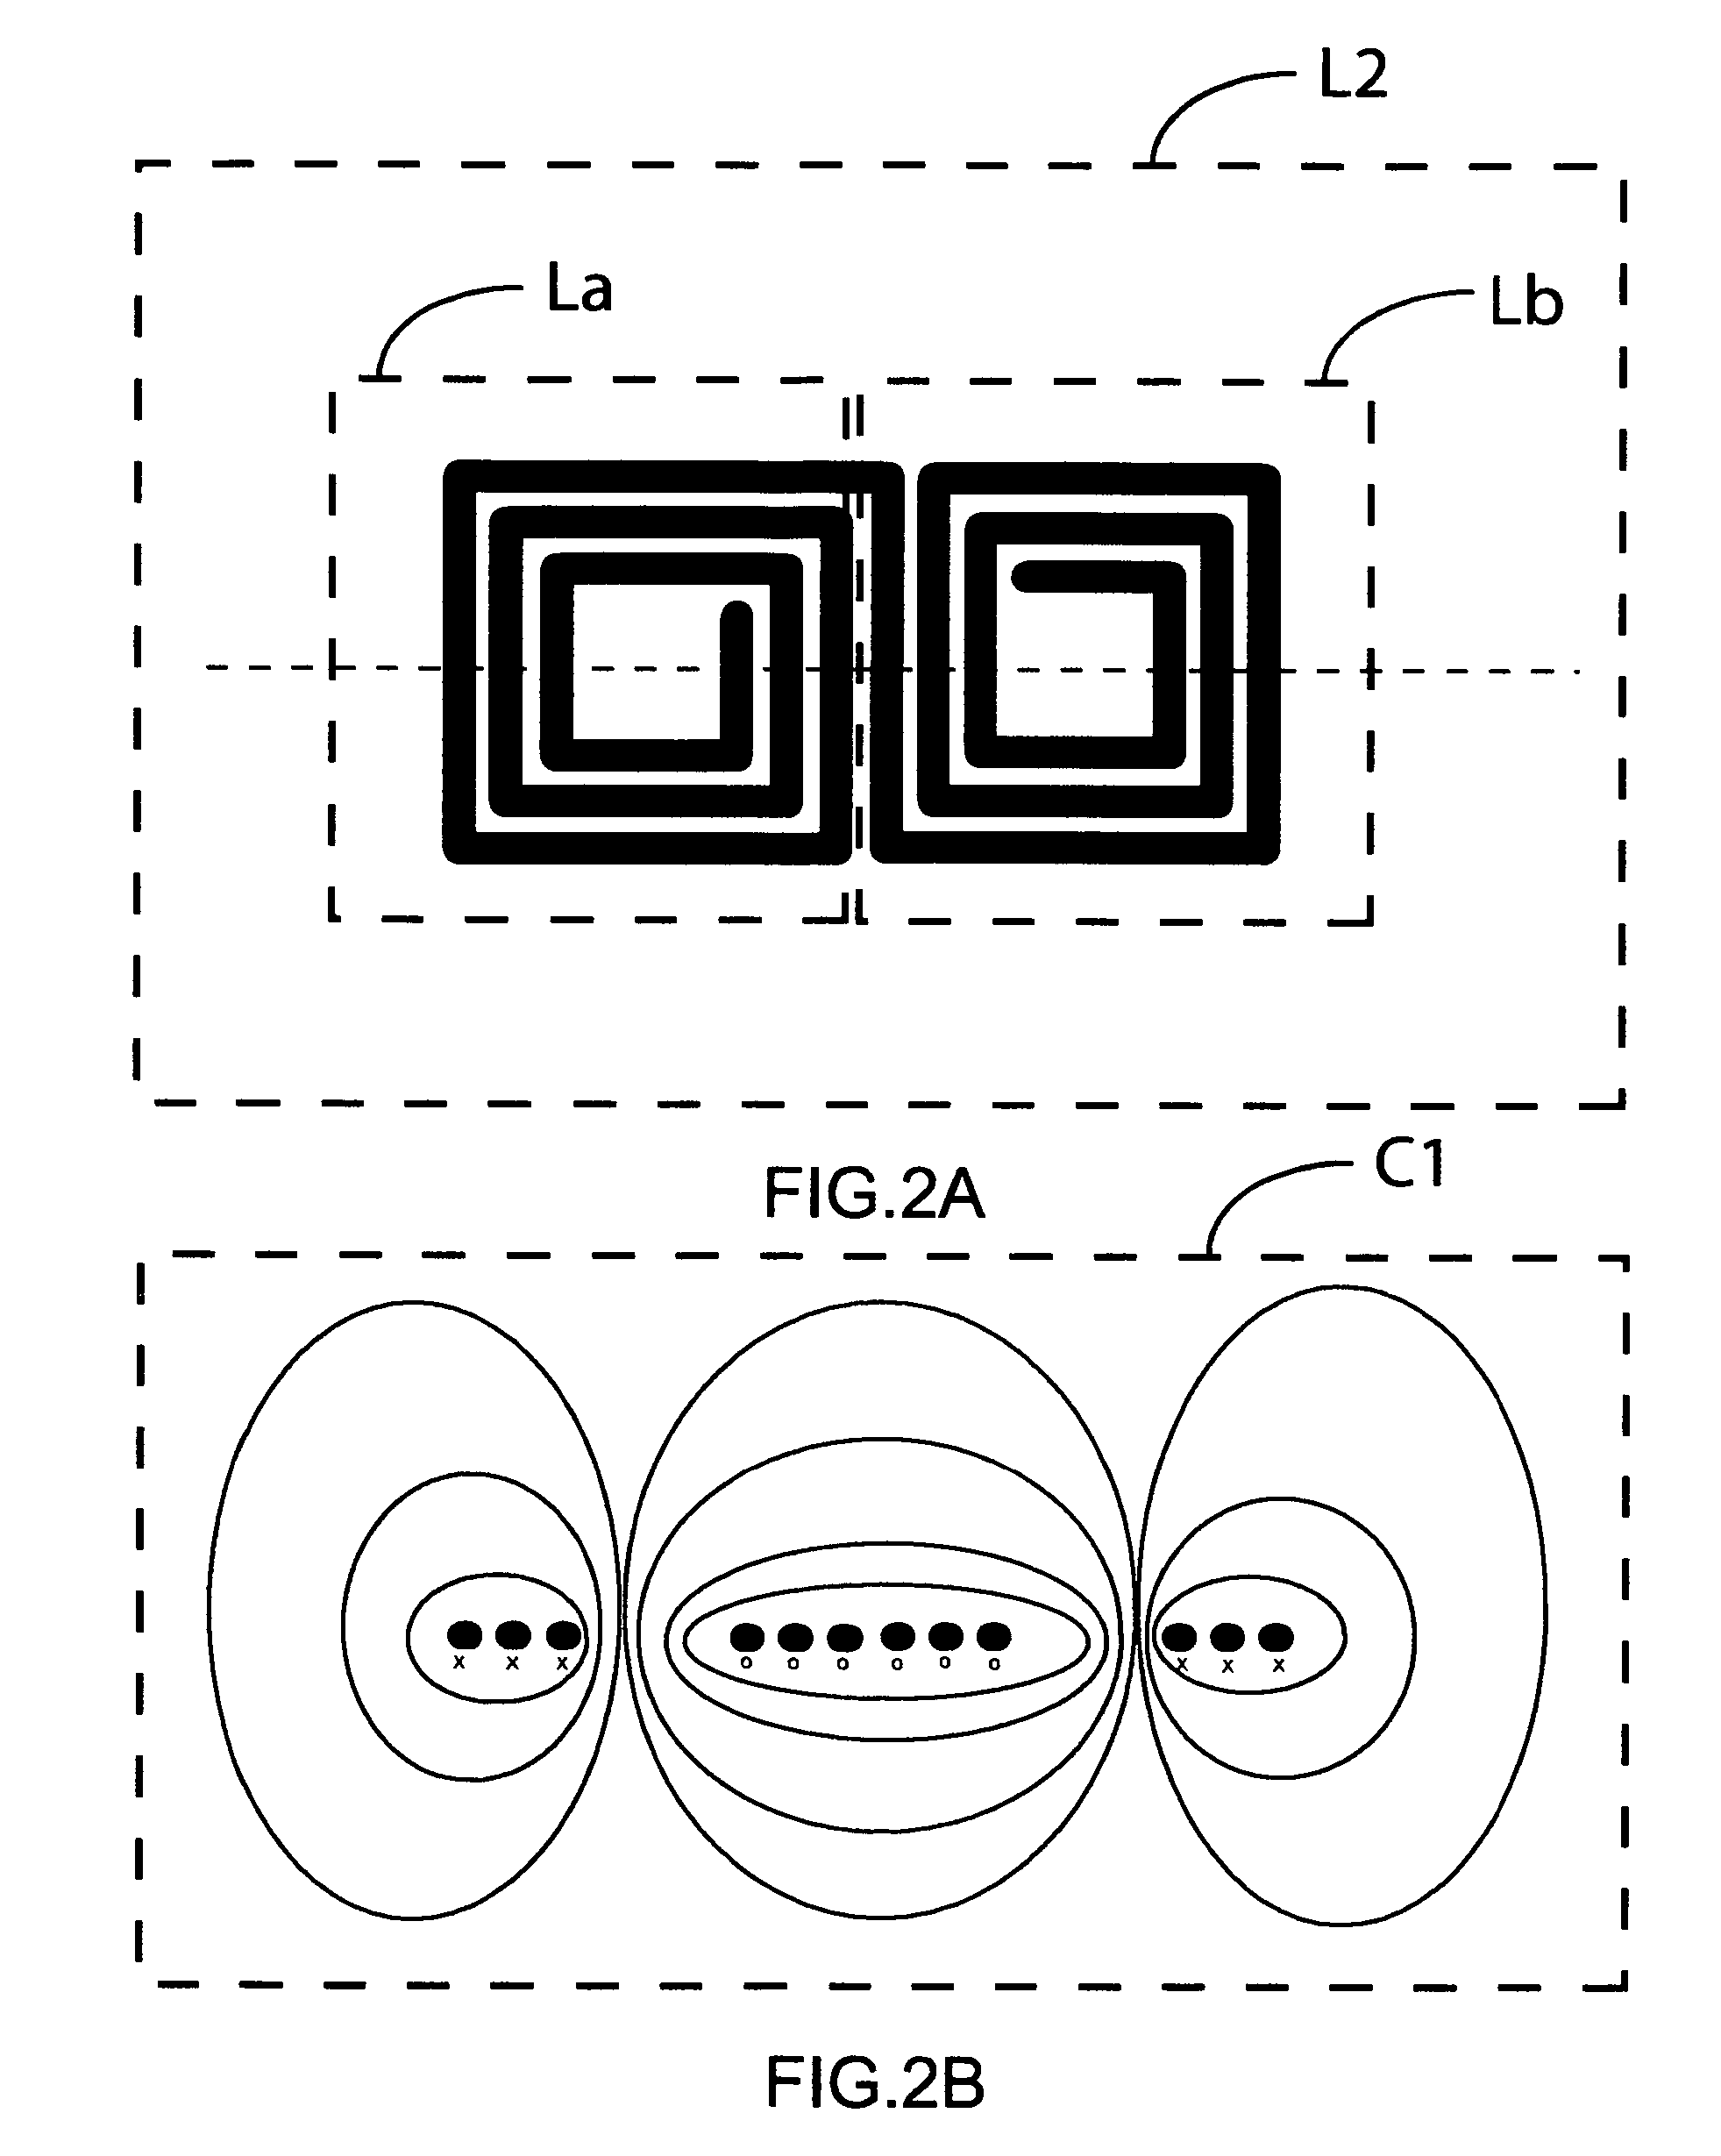 Air core inductive element on printed circuit board for use in switching power conversion circuitries